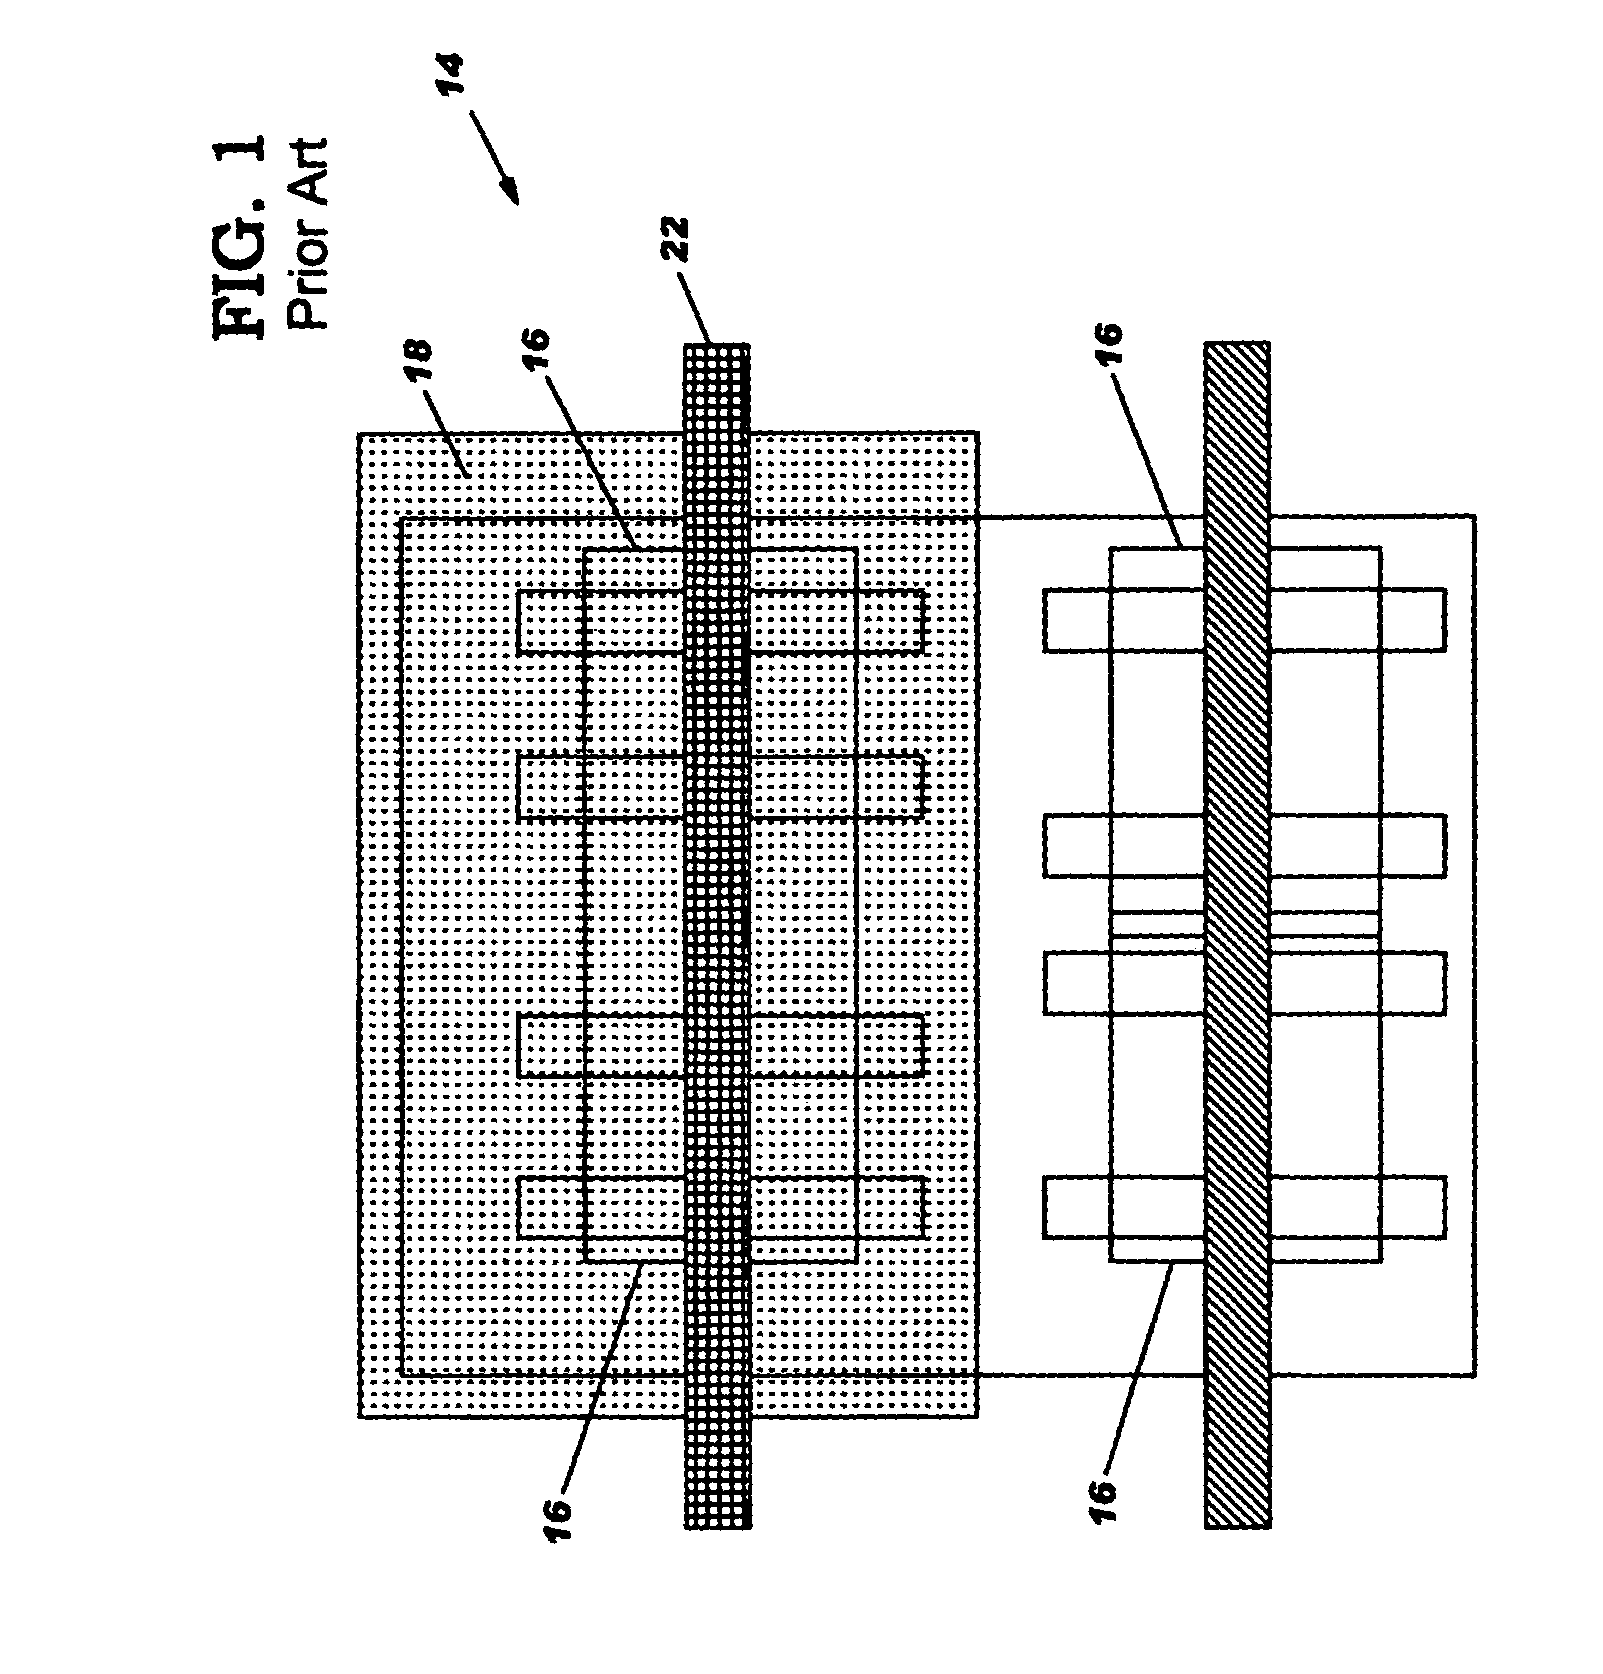 Multiple supply gate array backfill structure